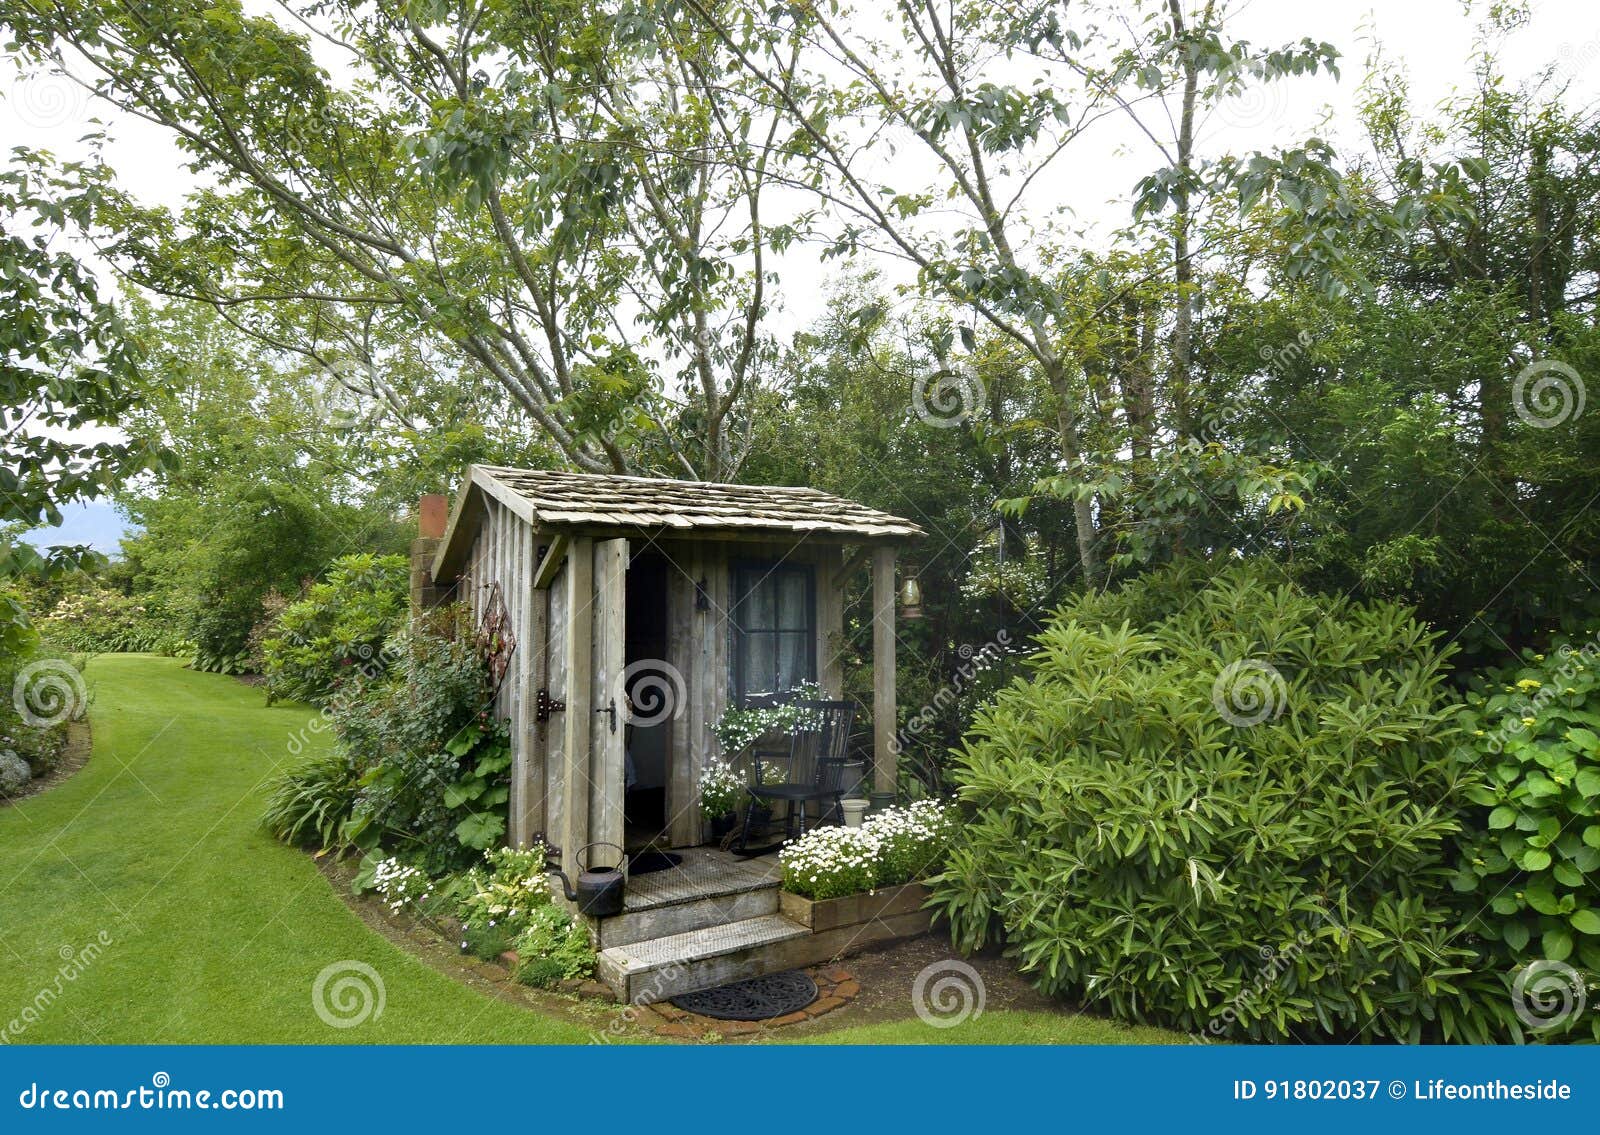 cute tiny timber antique shack sitting in stunning flower garden